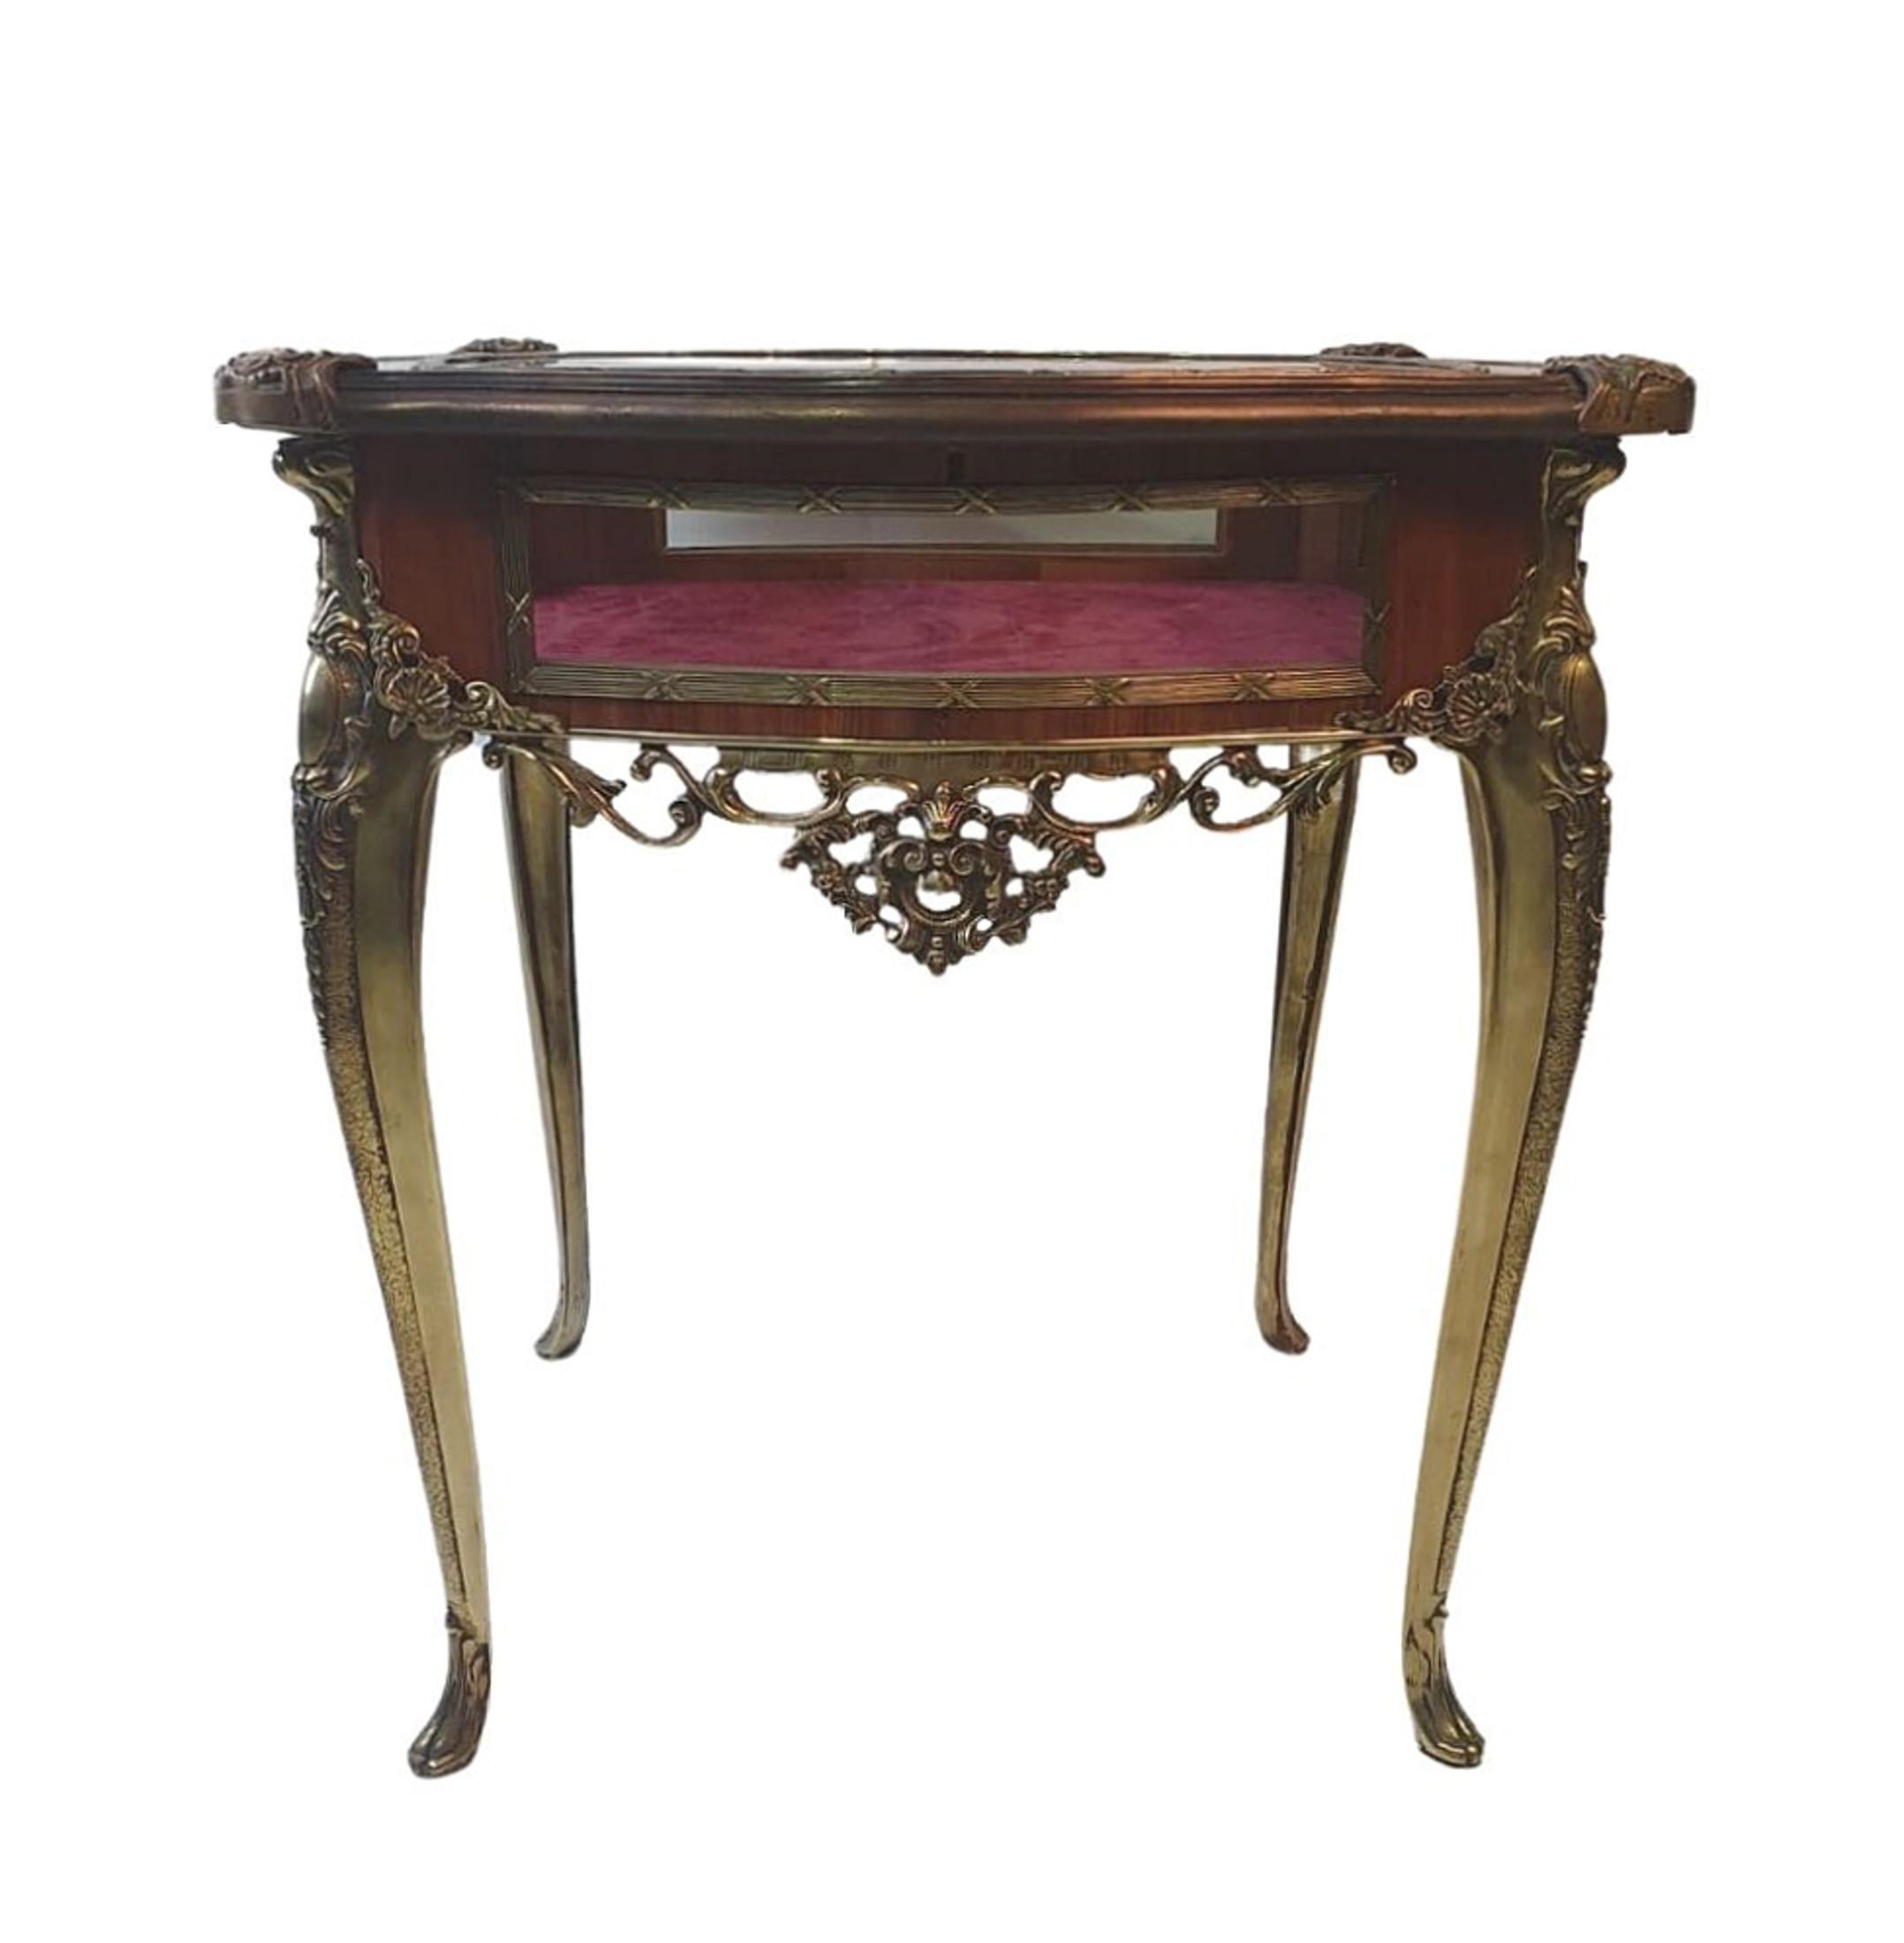 Rare 19th Century museum quality brass and kingwood bijouterie table, the shaped and moulded top with brass mounted sides, cross banded in kingwood and with centred brass framed glass window opening to a red velvet interior. The frieze with four